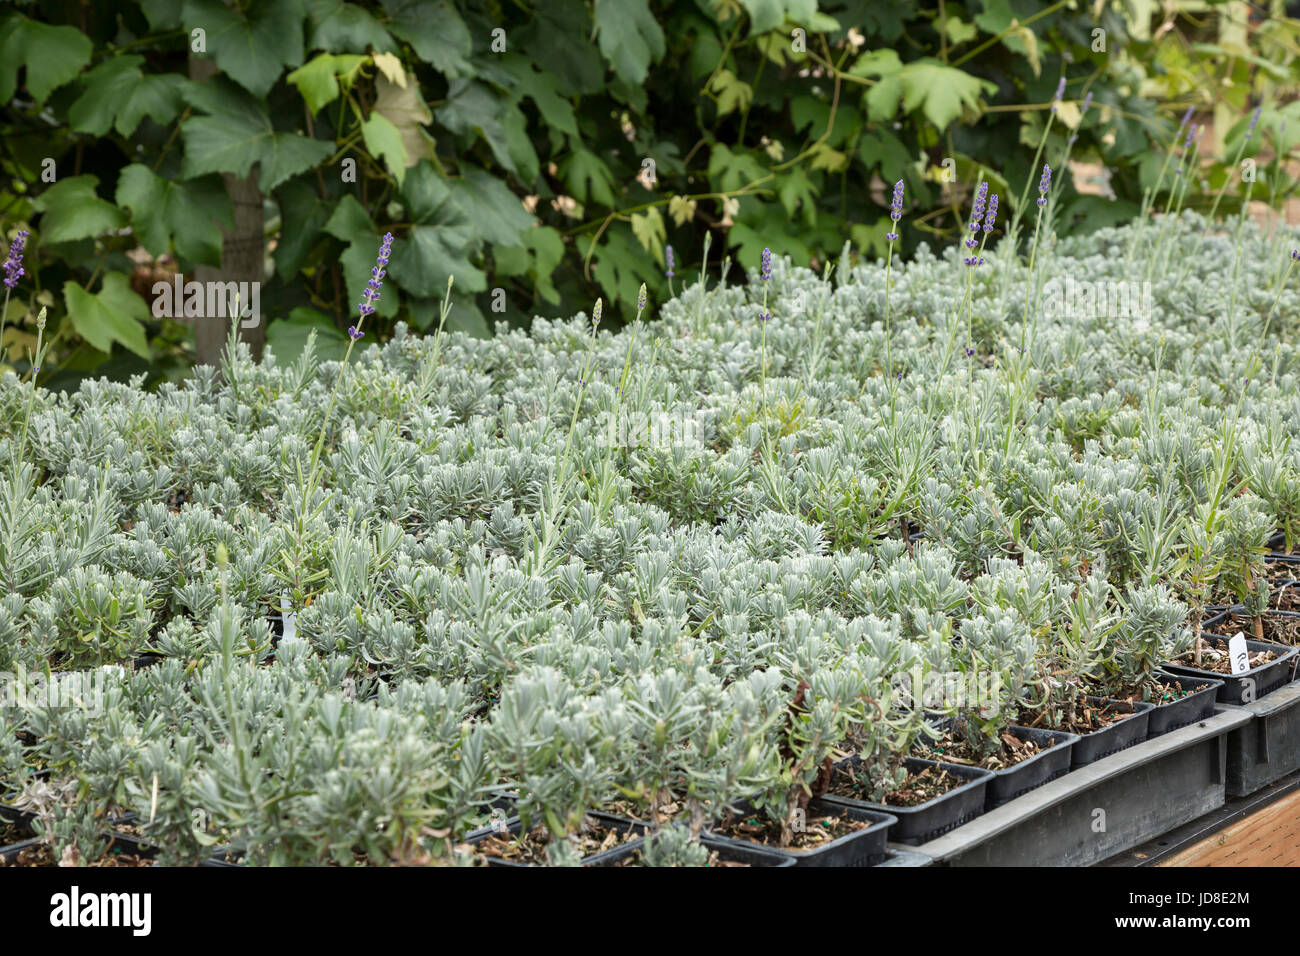 Trays of small potted lavender plants Stock Photo